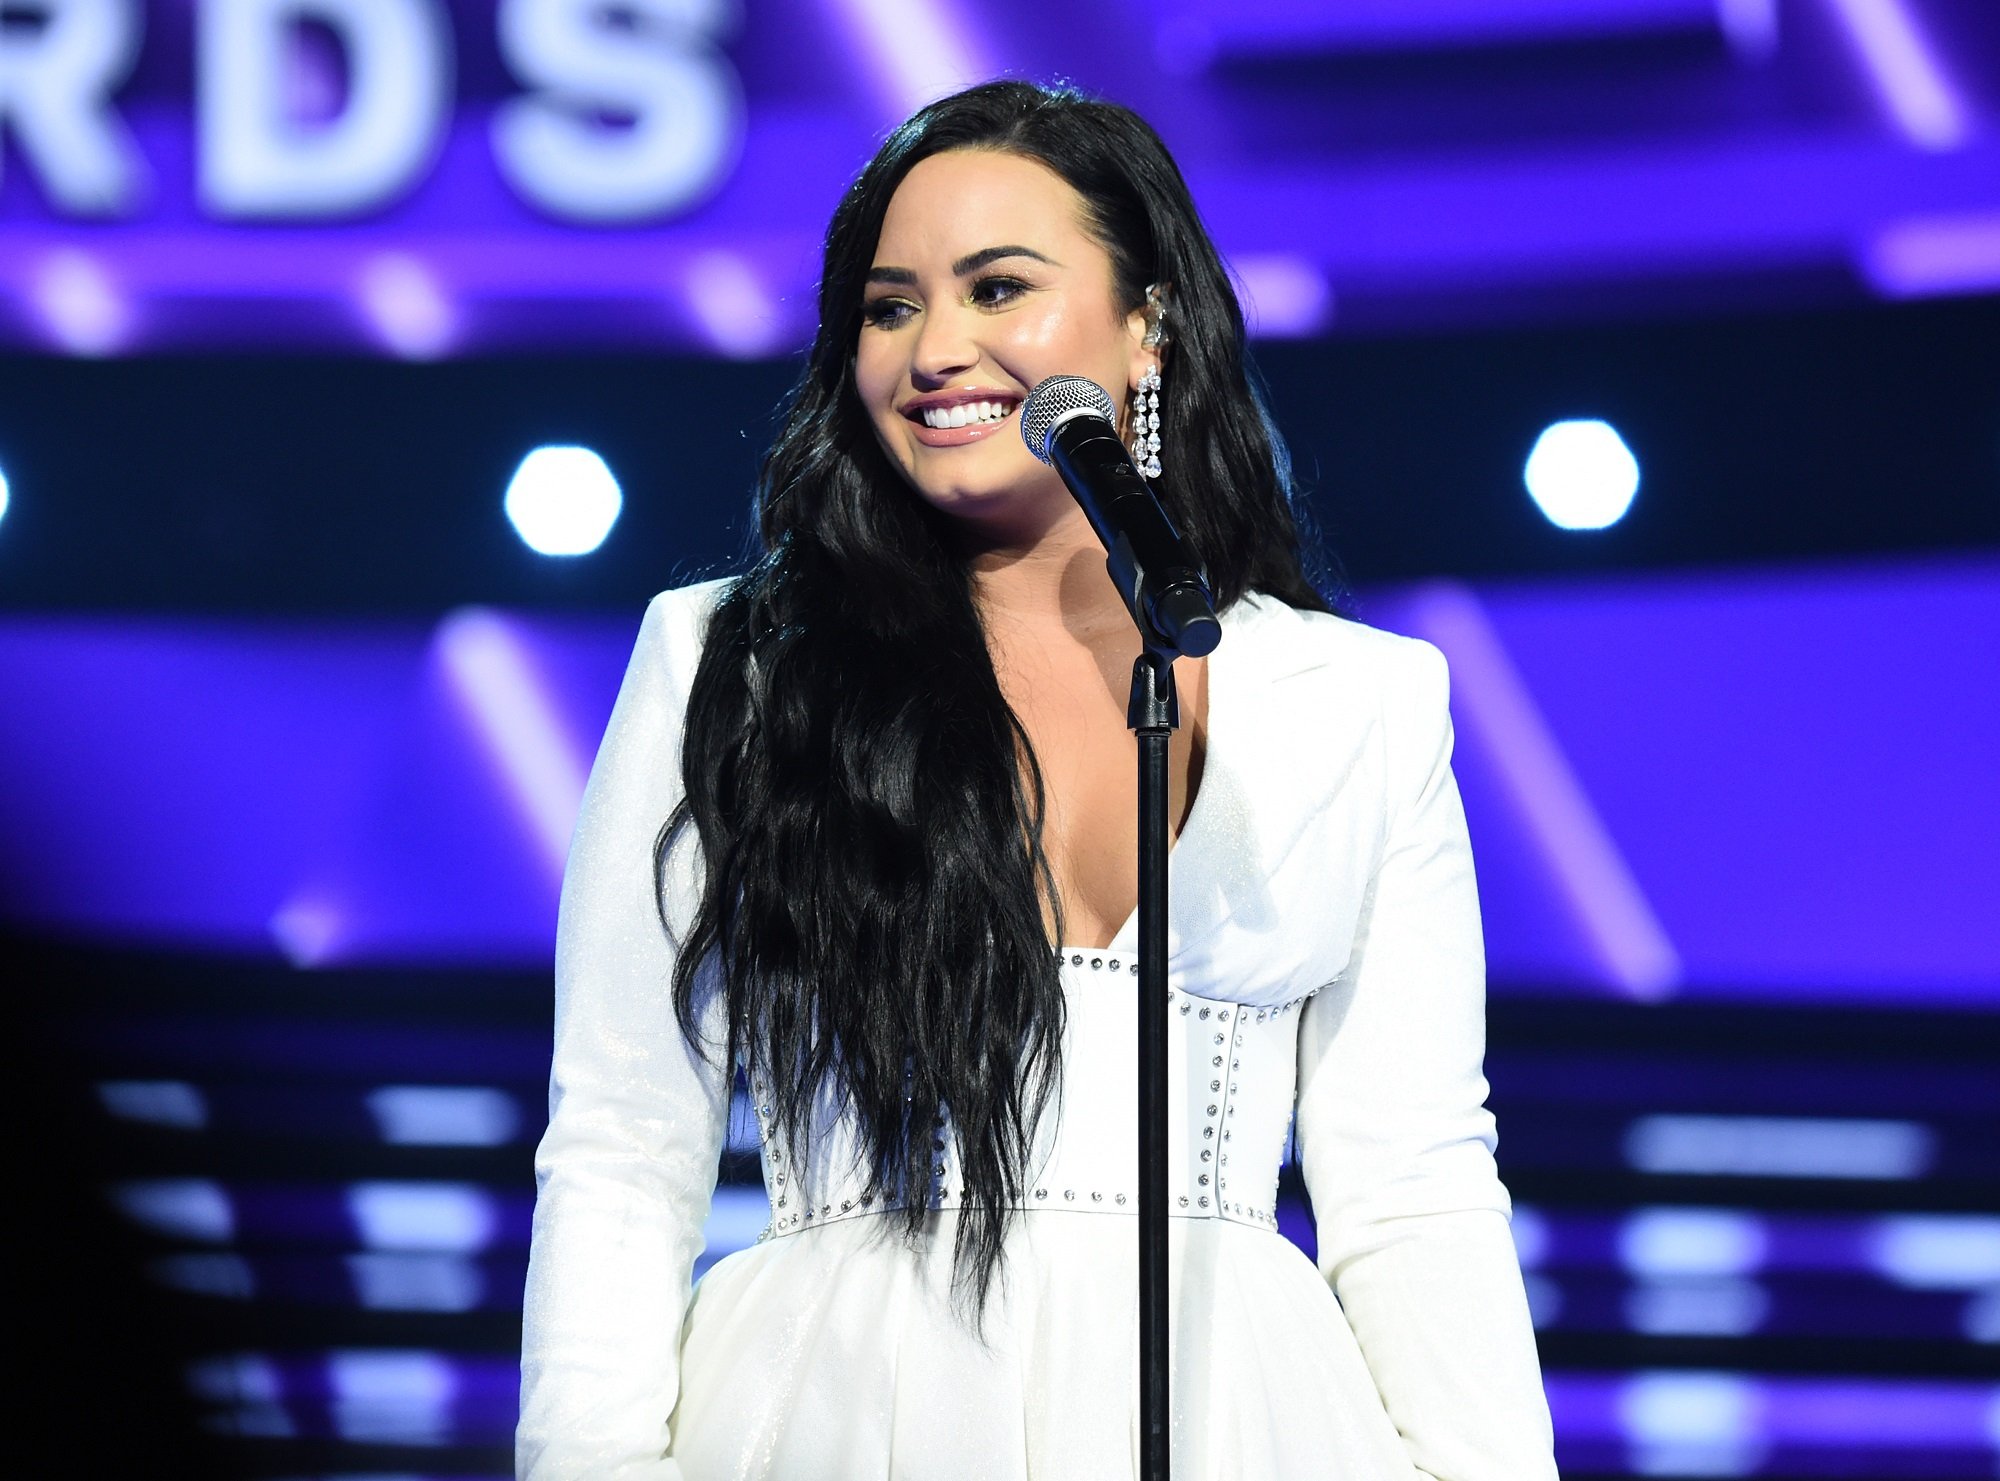 Demi Lovato performs at the 62nd Annual GRAMMY Awards on January 26, 2020 in Los Angeles, California.